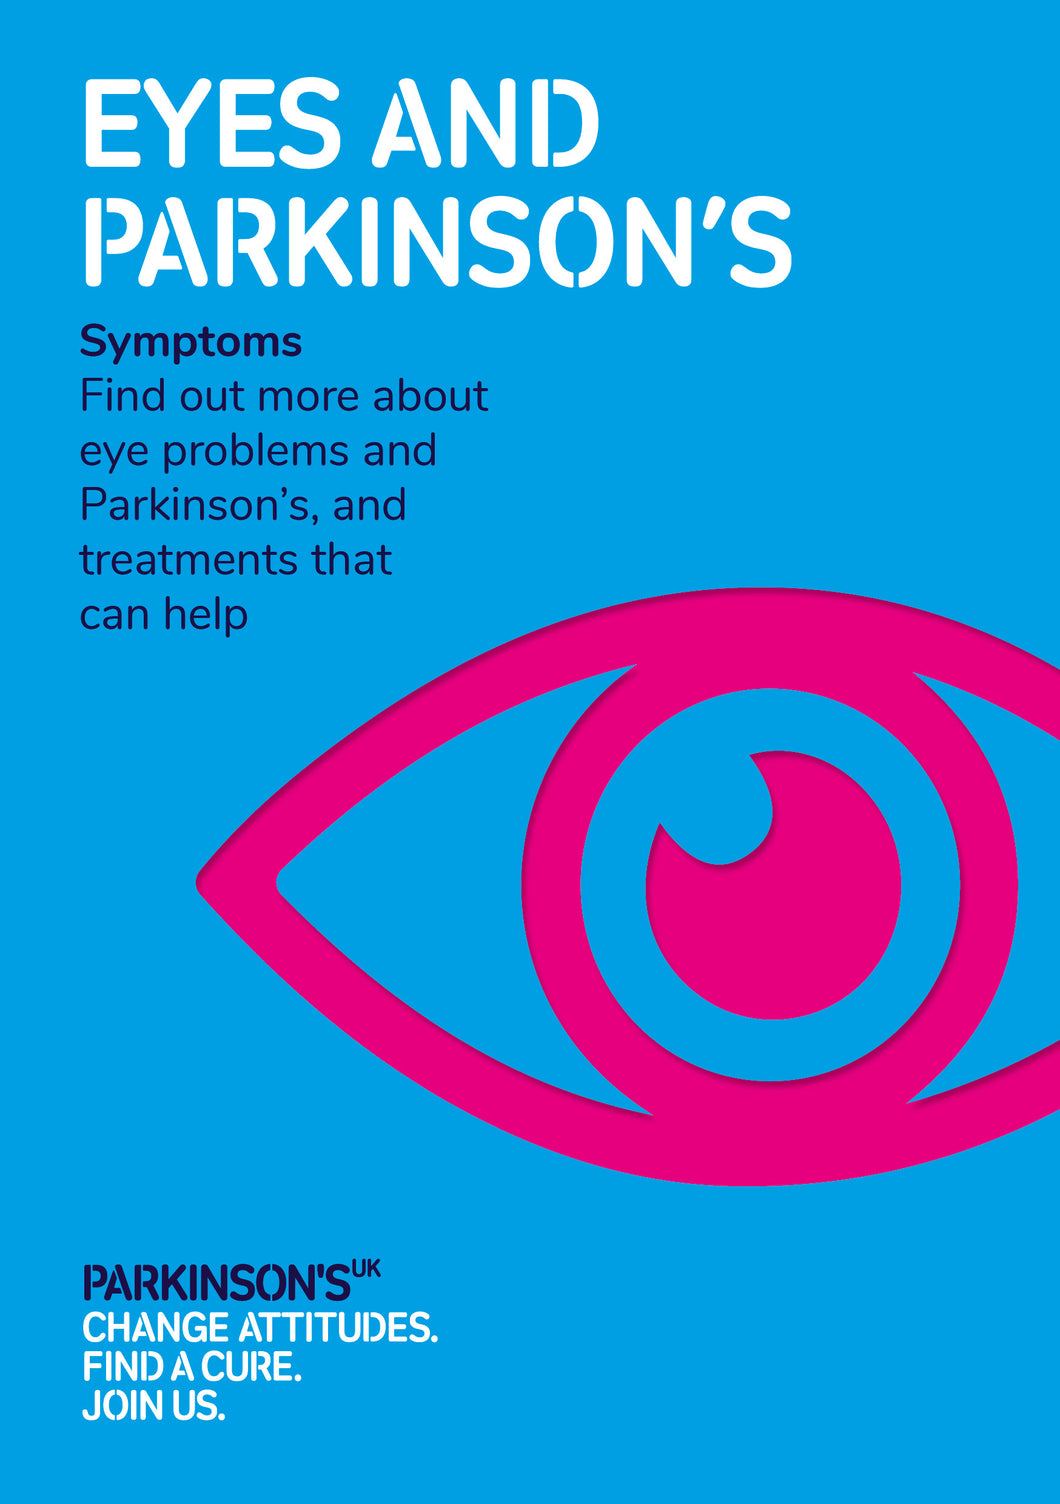 Eyes and Parkinson’s